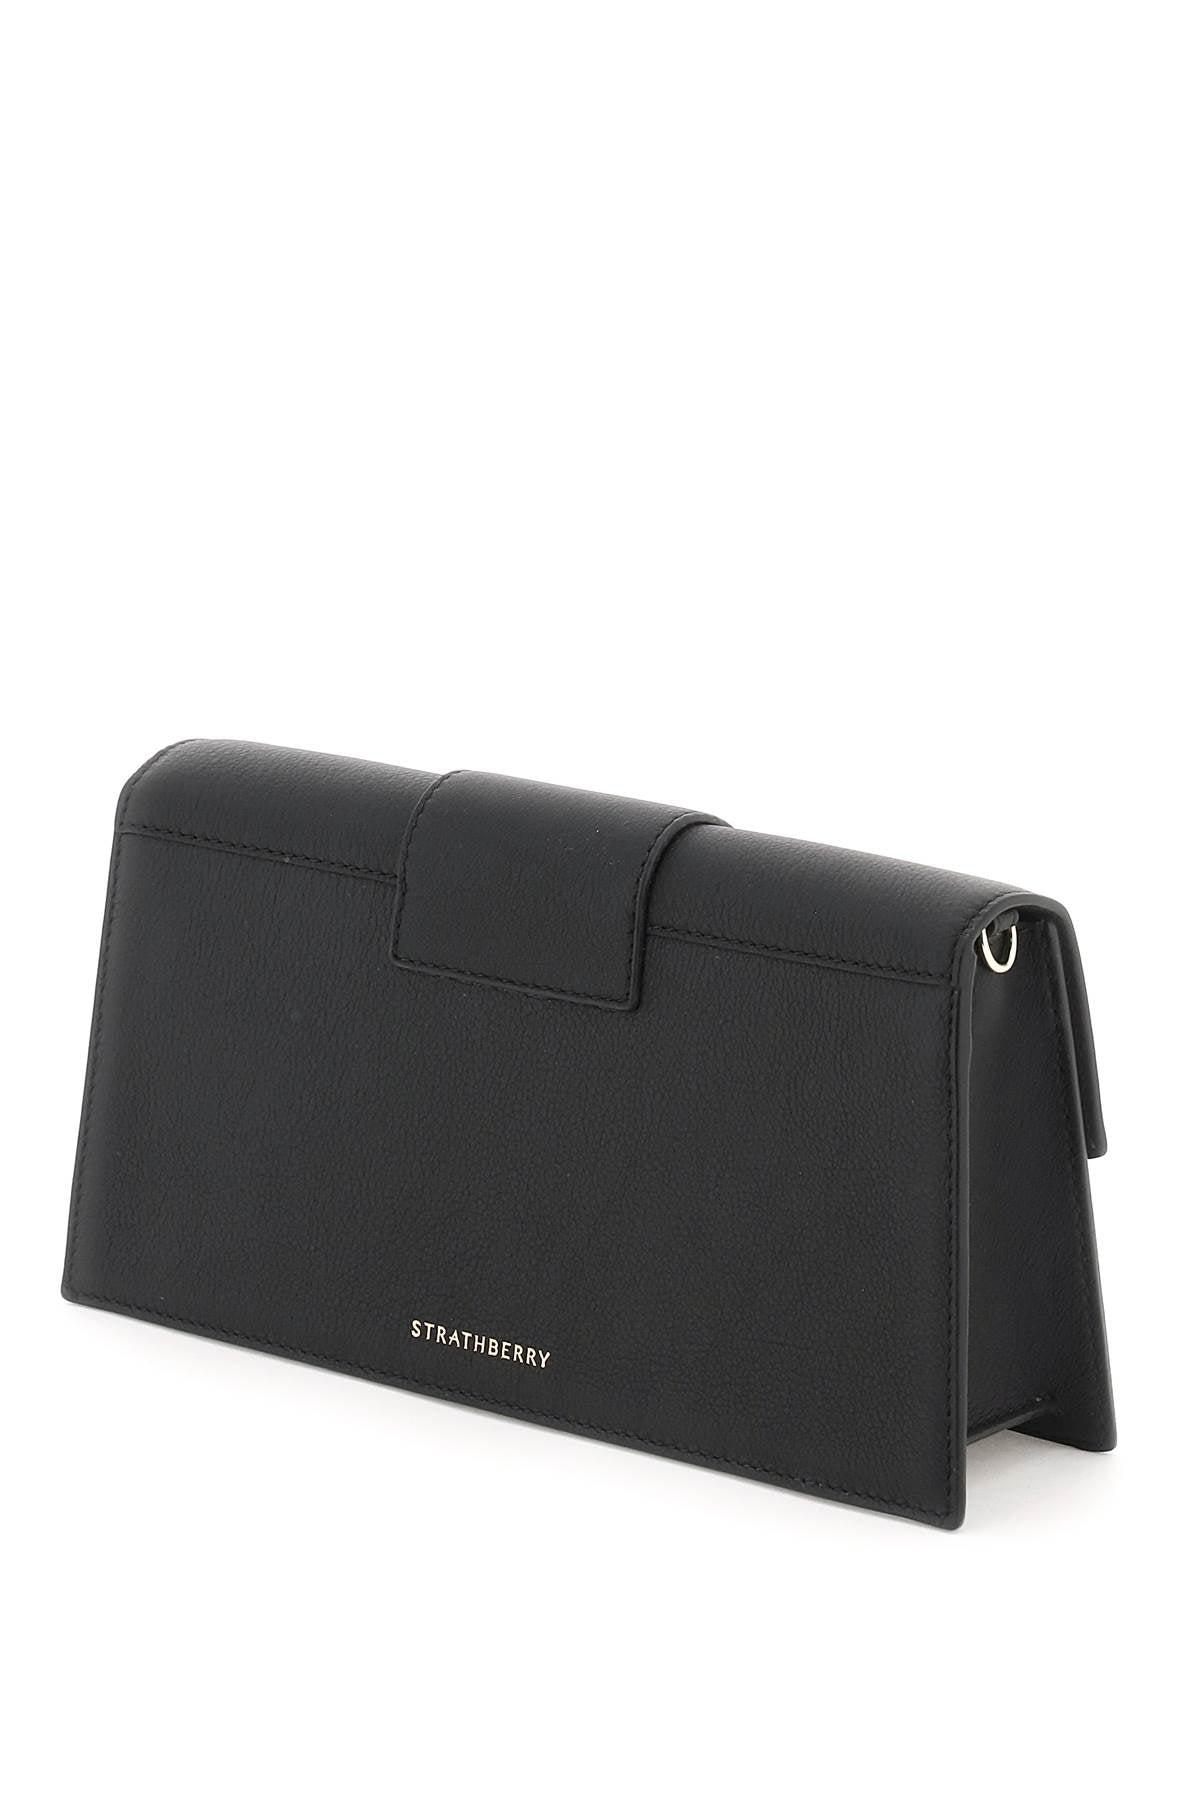 Strathberry 'mini Crescent' Leather Bag in Black